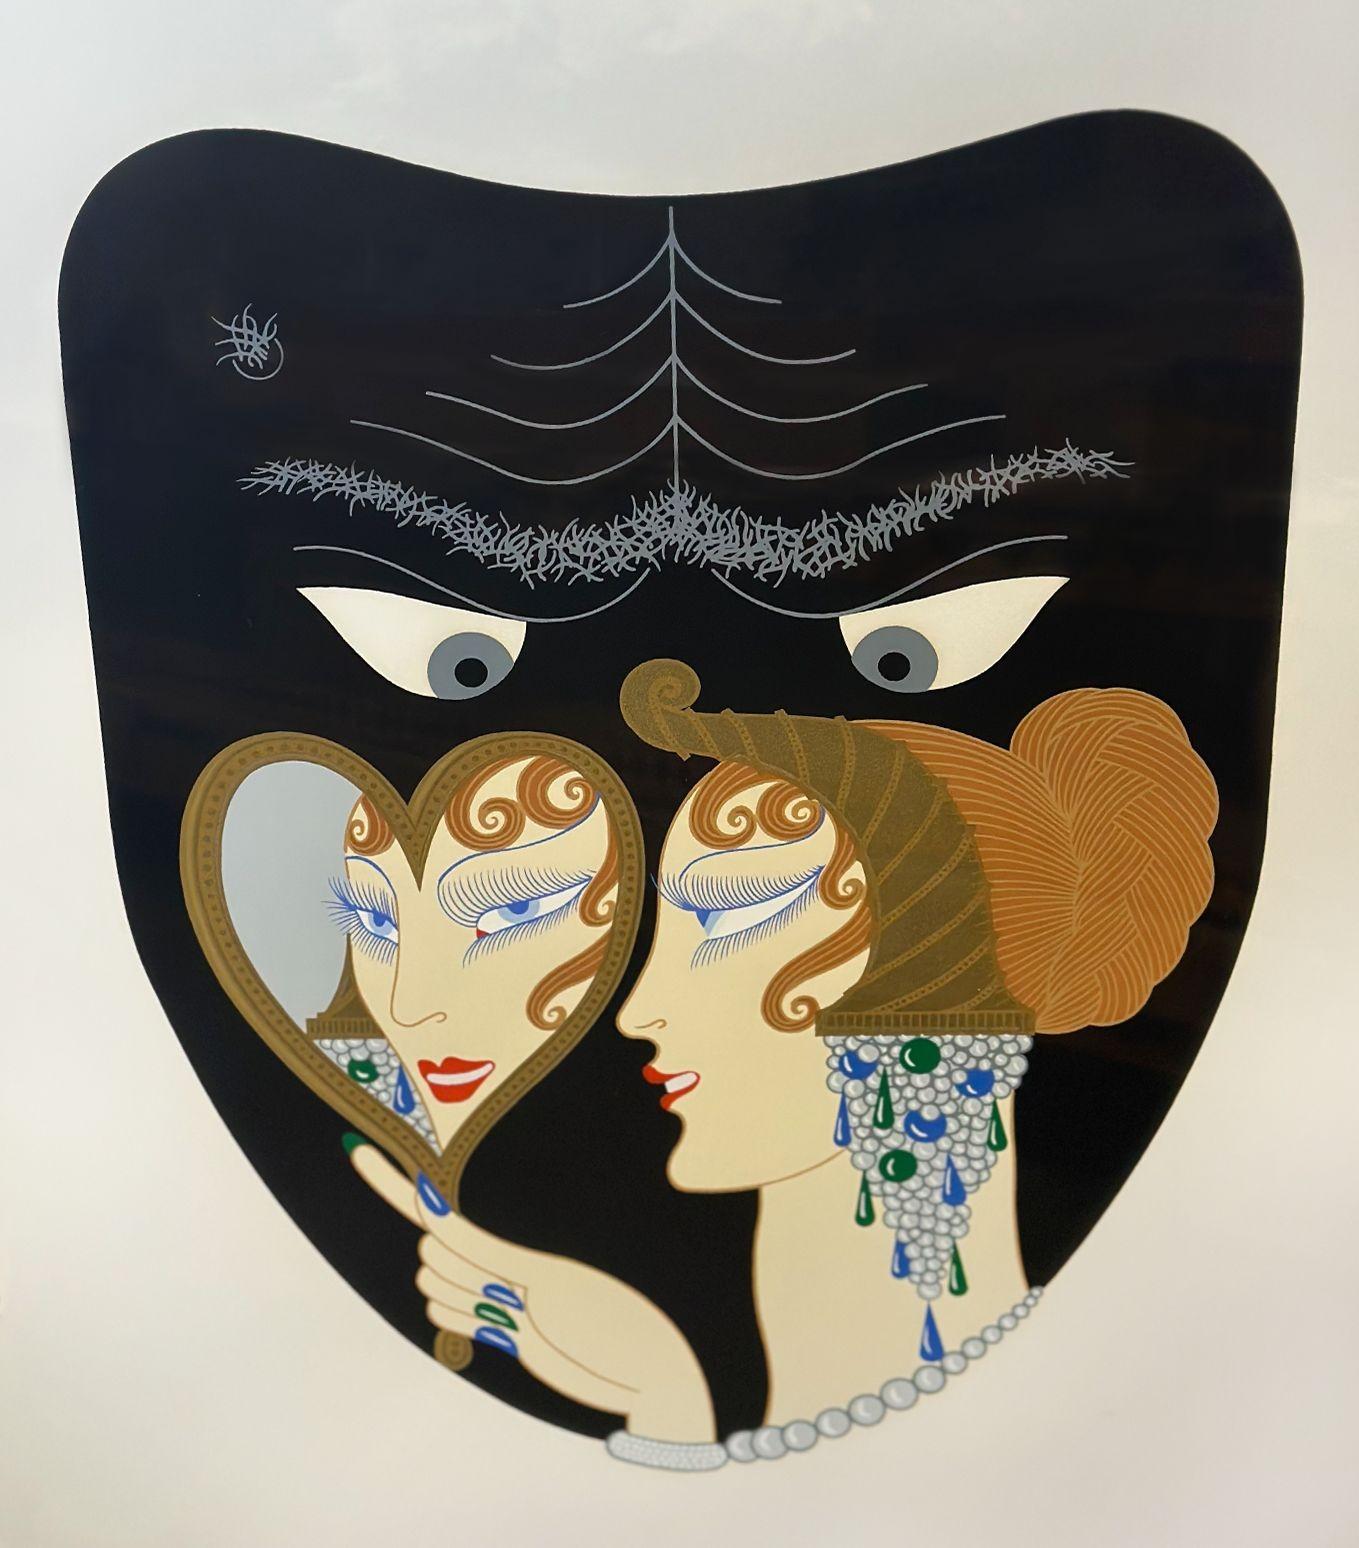 Set of 7 Erté Lithographs of the Seven Deadly Sins, 1982 For Sale 4